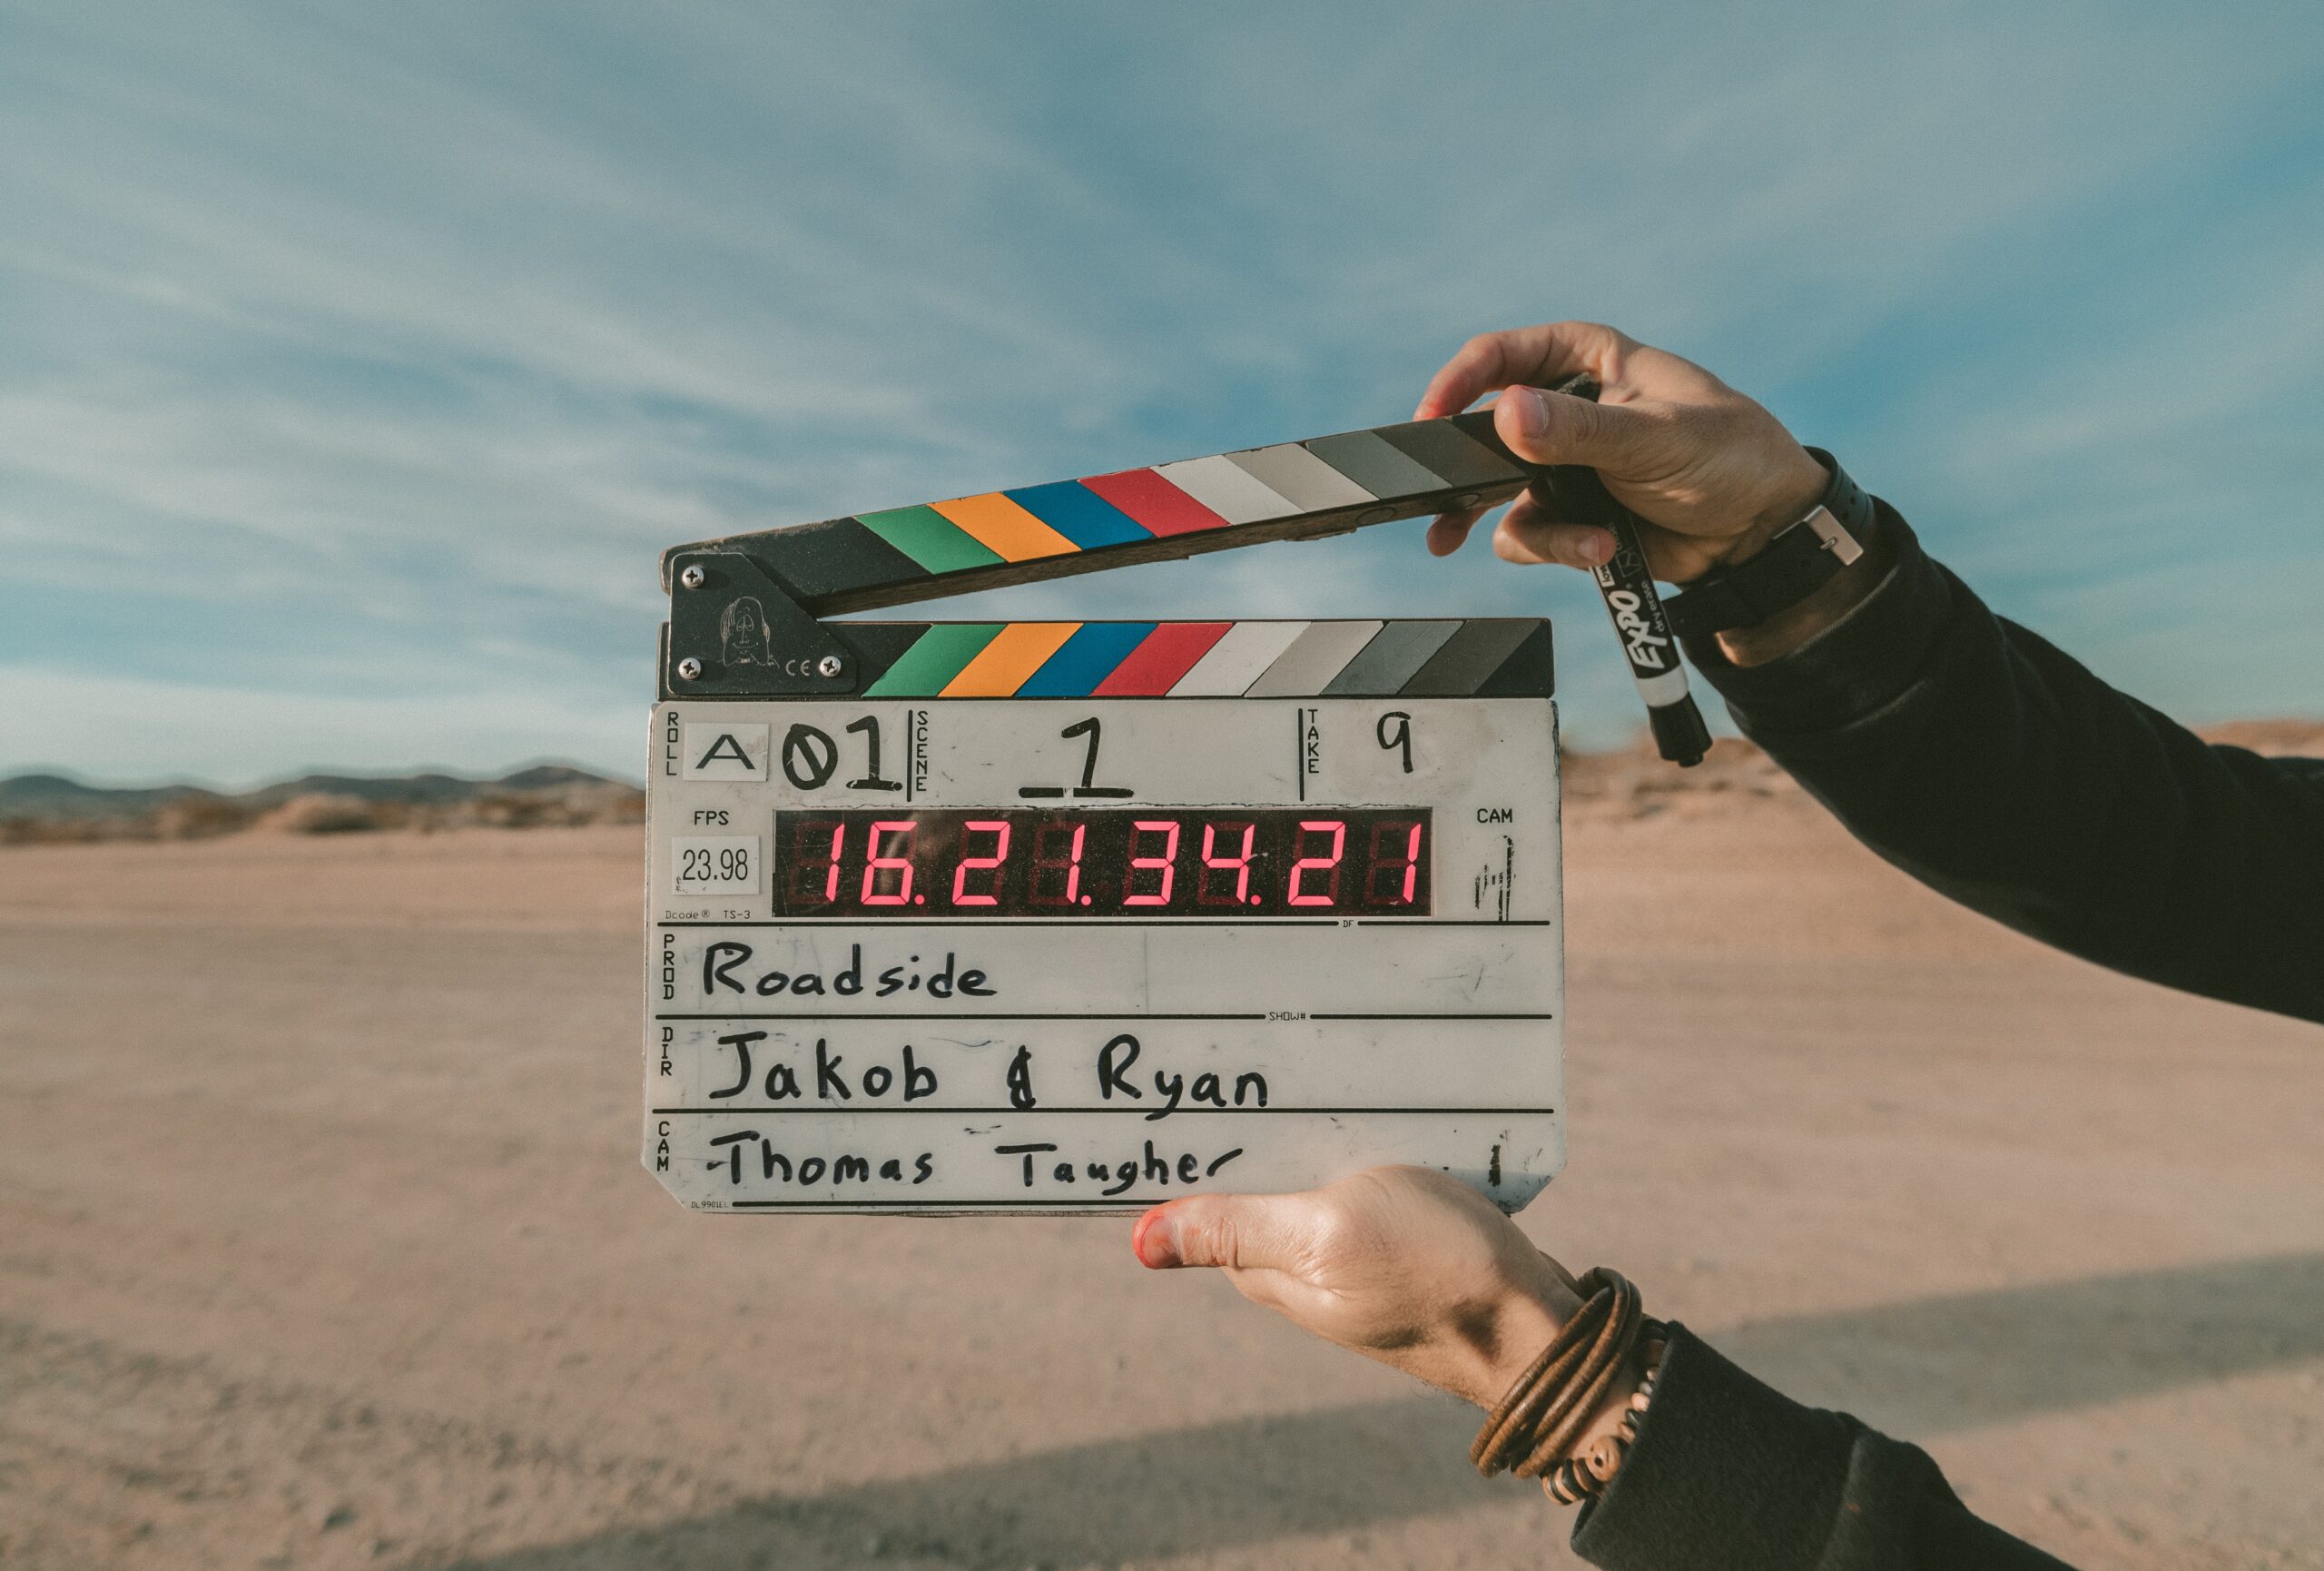 A person holding a C clapper board behind a desert background.